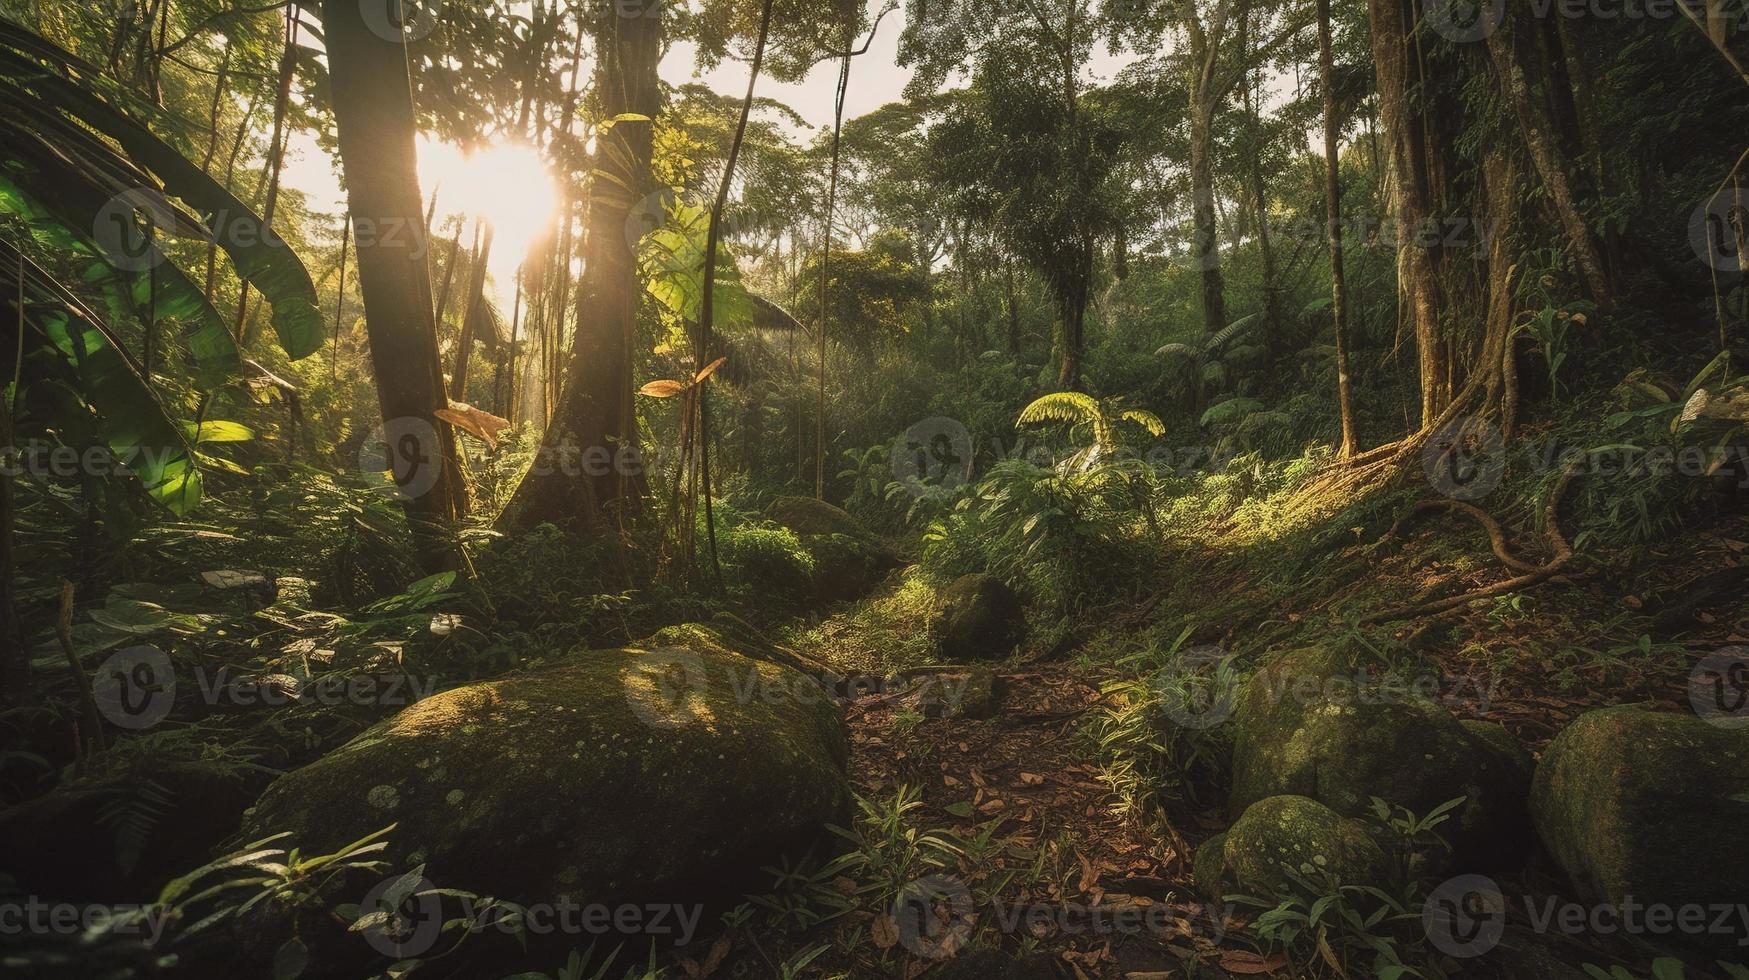 A peaceful forest clearing bathed in warm sunlight, surrounded by tall trees and lush foliage, with a gentle stream trickling through the undergrowth and a distant mountain range visible photo